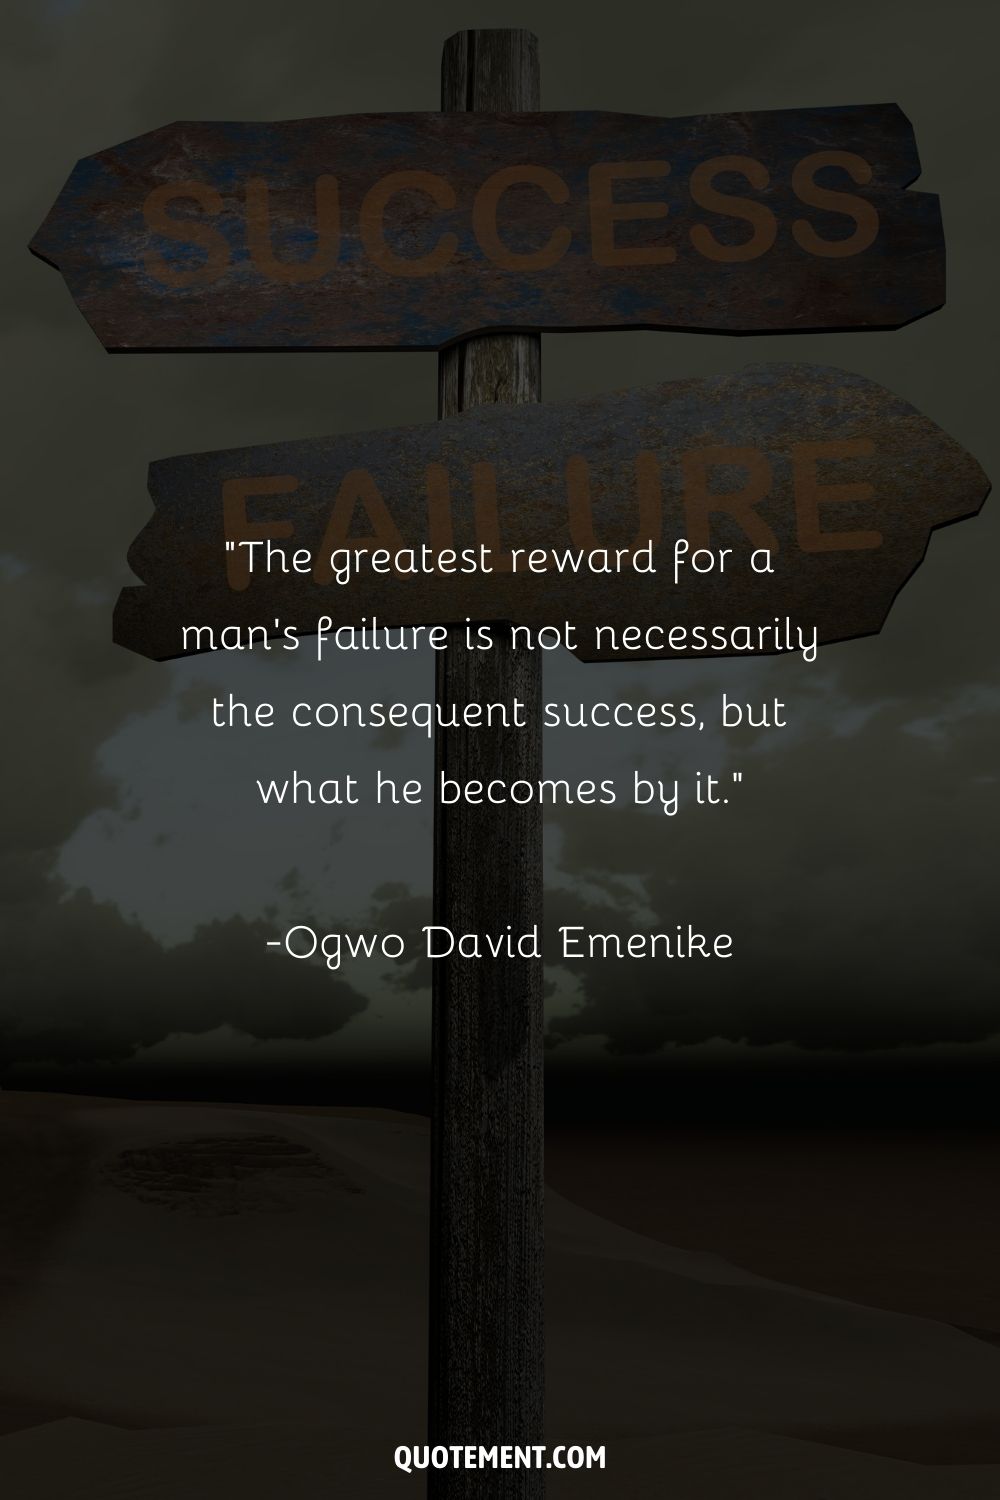 “The greatest reward for a man's failure is not necessarily the consequent success, but what he becomes by it.”